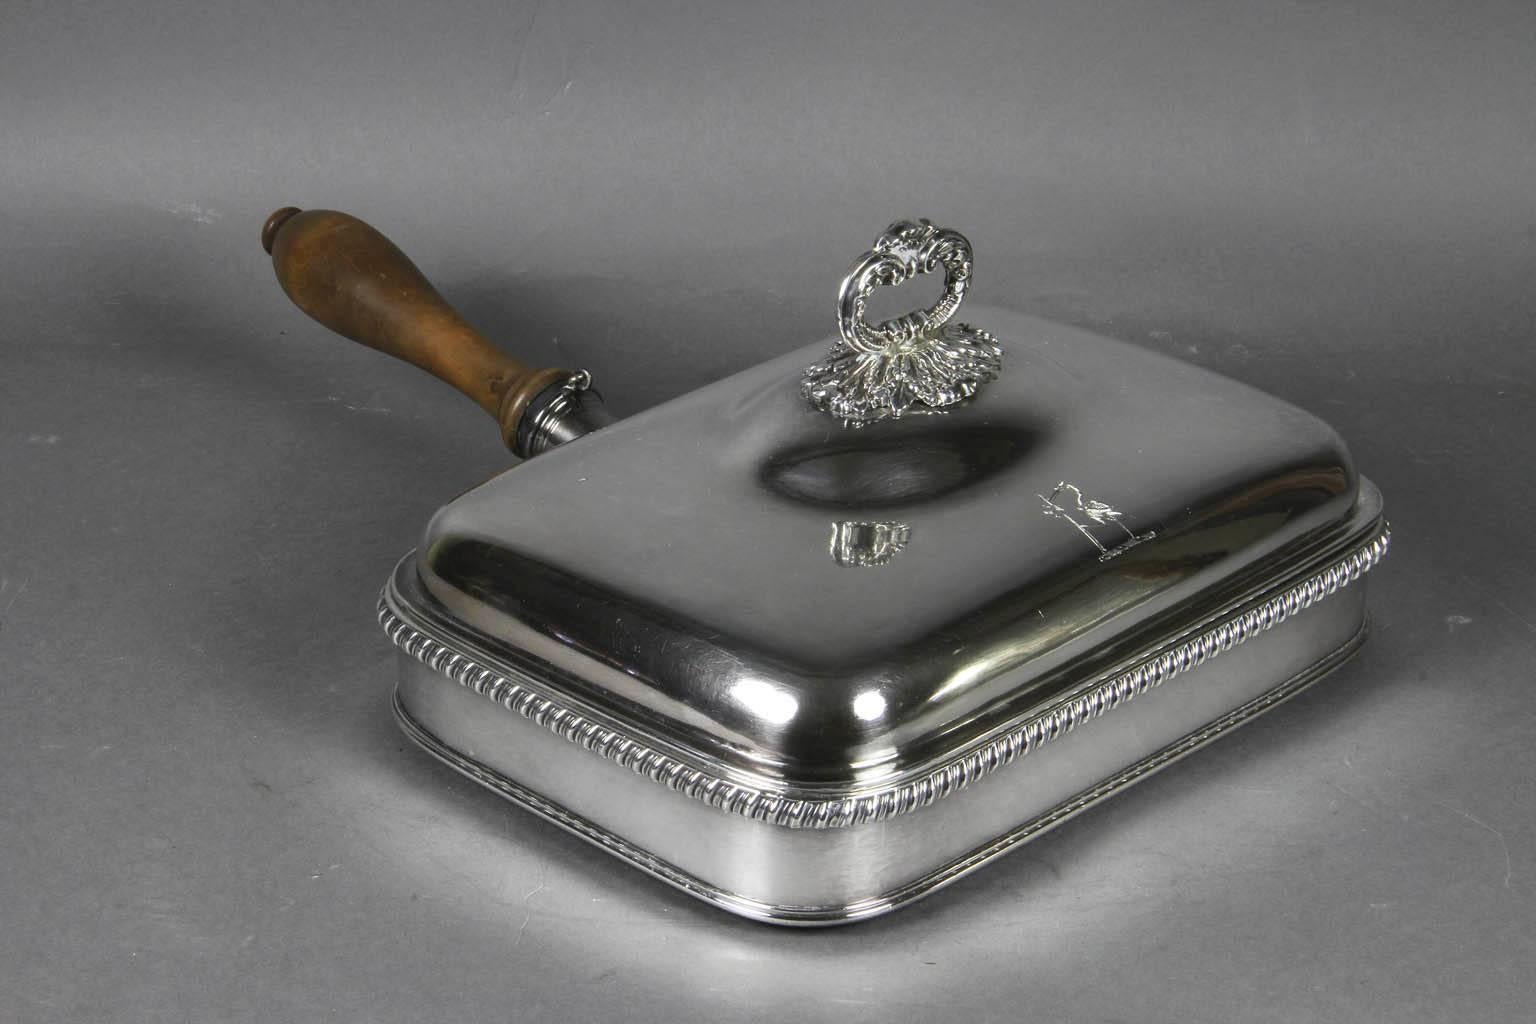 Typical form rectangular with hinged removable domed lid with engraved crest and cast loop finial, wood handle unscrews expose fill hole for hot water to be poured into conforming dish form base. Provenance: James Robinson NYC, Auchincloss family,